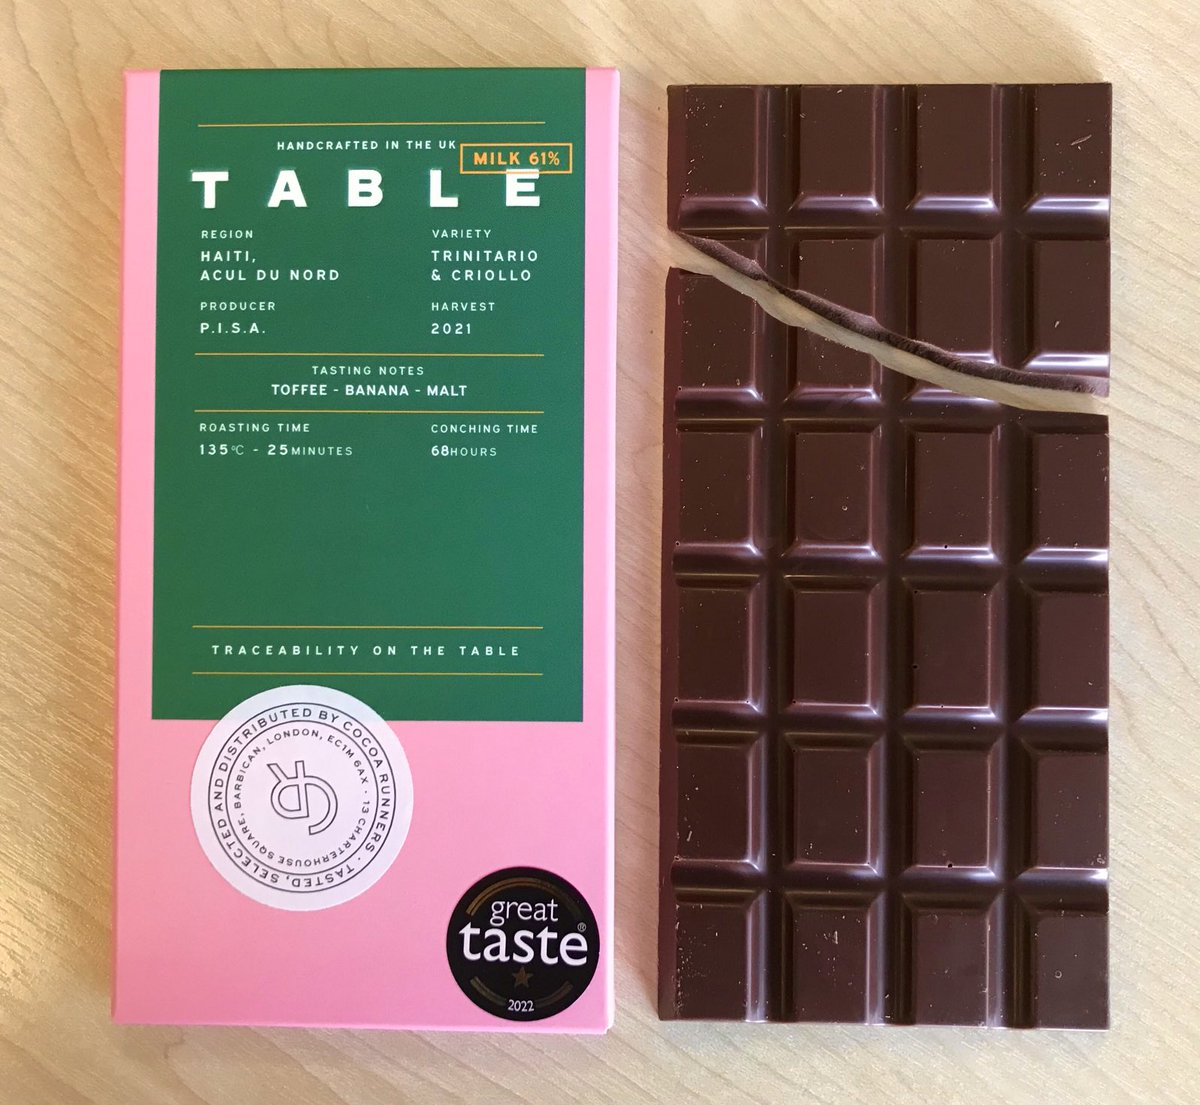 We totally adore this 62% milk from Table in Liverpool. The Haitian beans are sourced via PISA, a social enterprise that pays farmers premium prices. The bar is beautifully made, rich and flavourful and v highly recommended